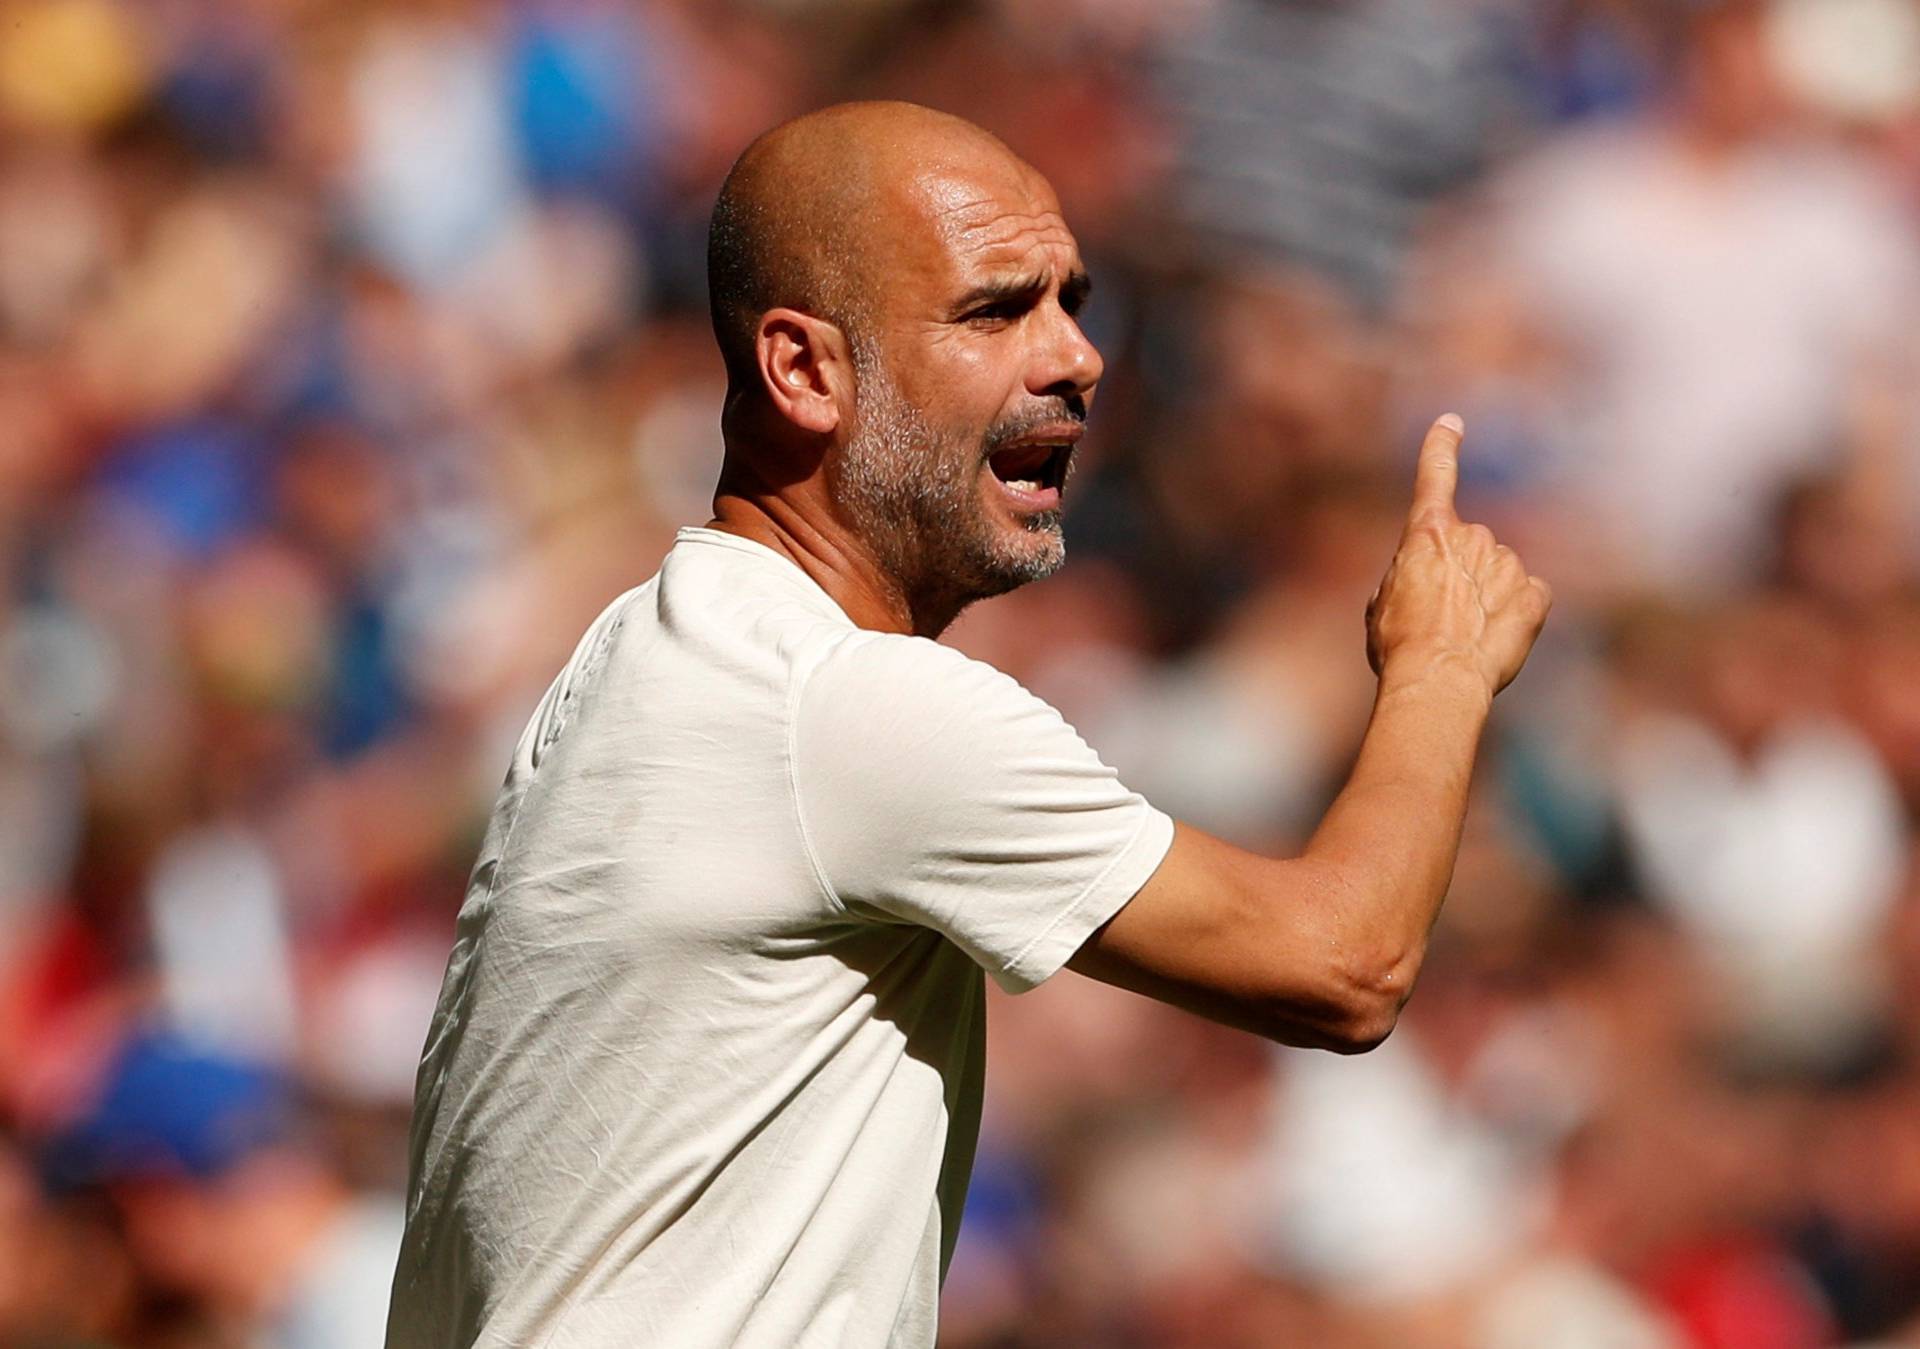 FILE PHOTO: Manchester City manager Pep Guardiola at Wembley Stadium, London, Britain - August 5, 2018